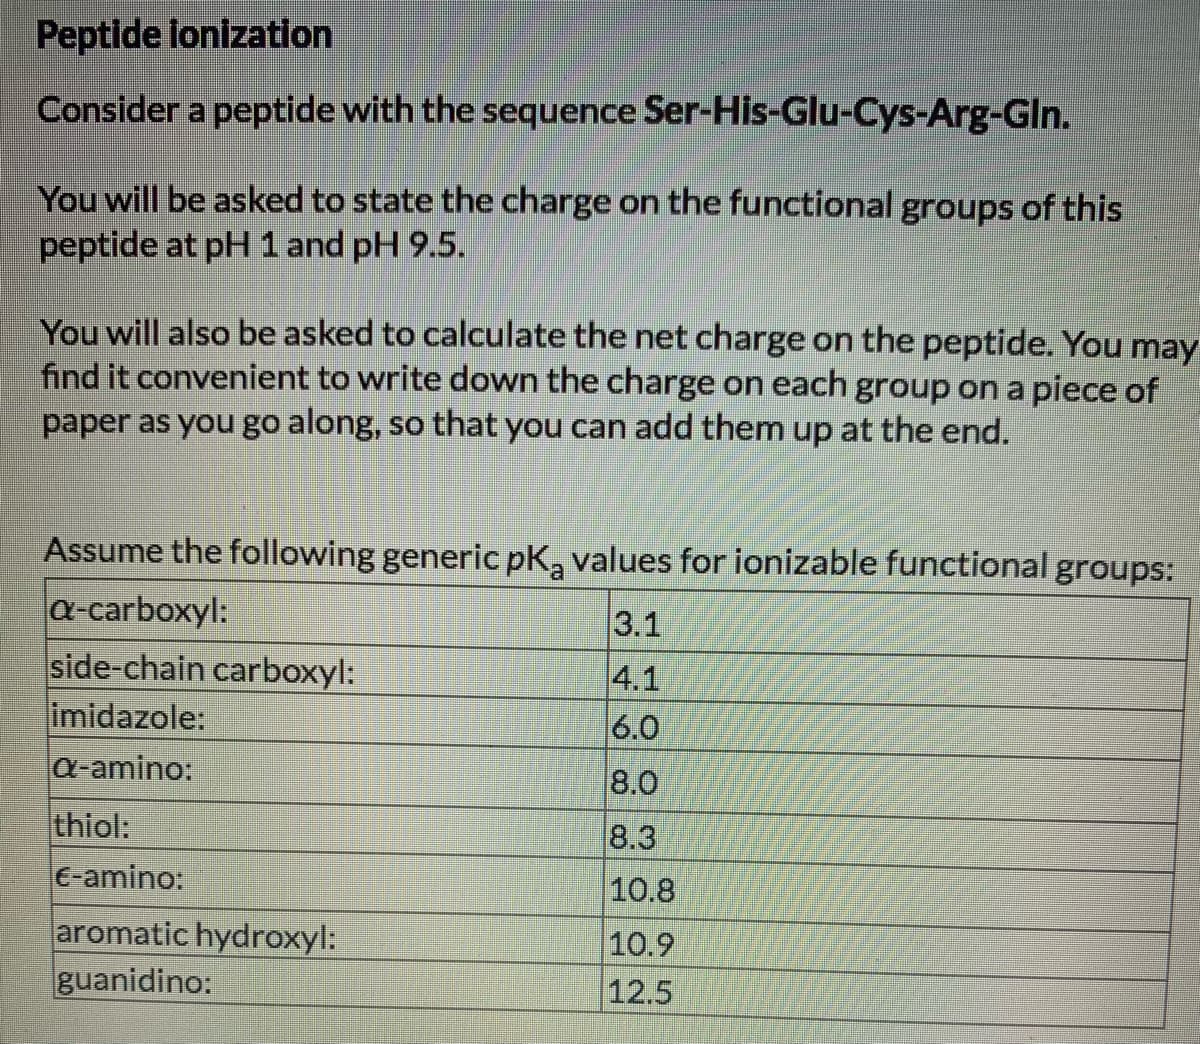 Peptide lonization
Consider a peptide with the sequence Ser-His-Glu-Cys-Arg-Gln.
You will be asked to state the charge on the functional groups of this
peptide at pH 1 and pH 9.5.
You will also be asked to calculate the net charge on the peptide. You may
find it convenient to write down the charge on each group on a piece of
paper as you go along, so that you can add them up at the end.
Assume the following generic pK, values for ionizable functional groups:
a-carboxyl:
side-chain carboxyl:
imidazole:
3.1
4.1
6.0
a-amino:
8.0
thiol:
8.3
E-amino:
10.8
aromatic hydroxyl:
guanidino:
10.9
12.5
